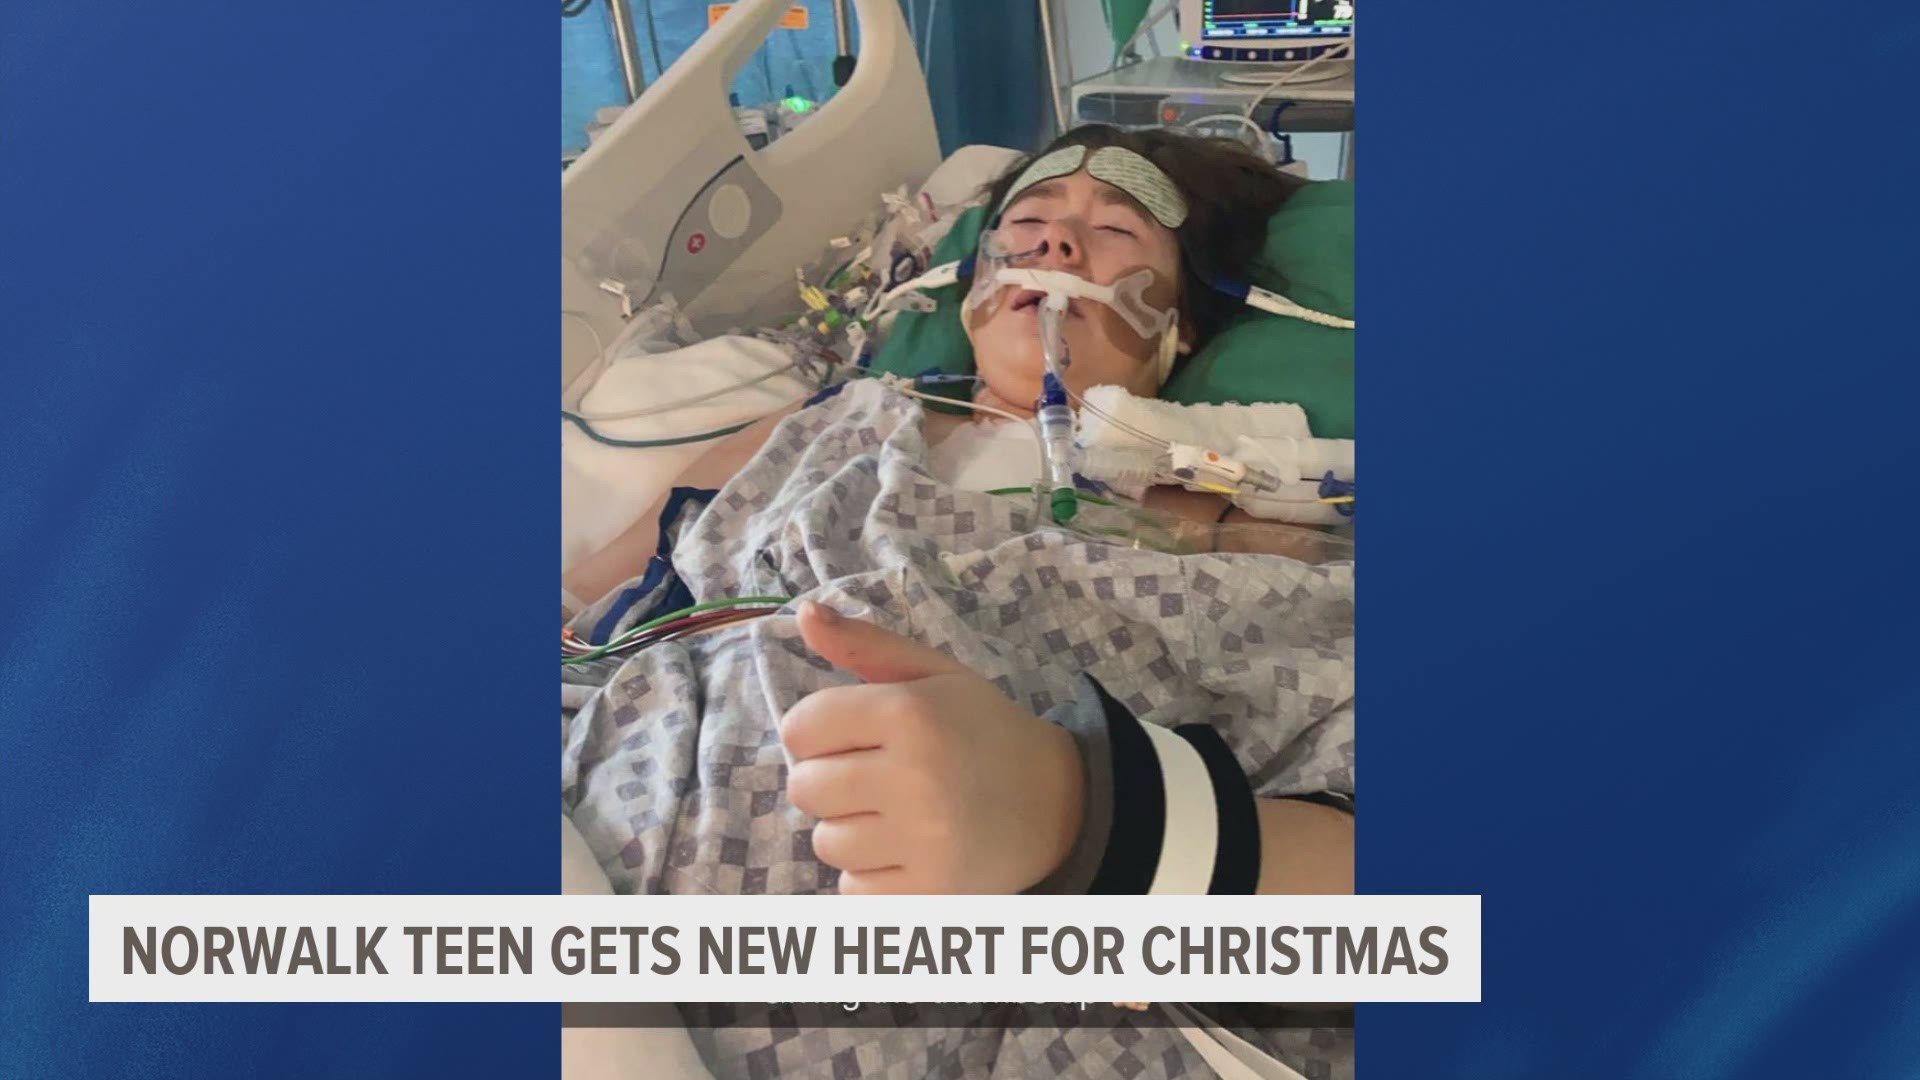 Doctors at the University of Iowa Hospitals & Clinics successfully completed a heart transplant on Brooklyn Soroka Christmas Eve.